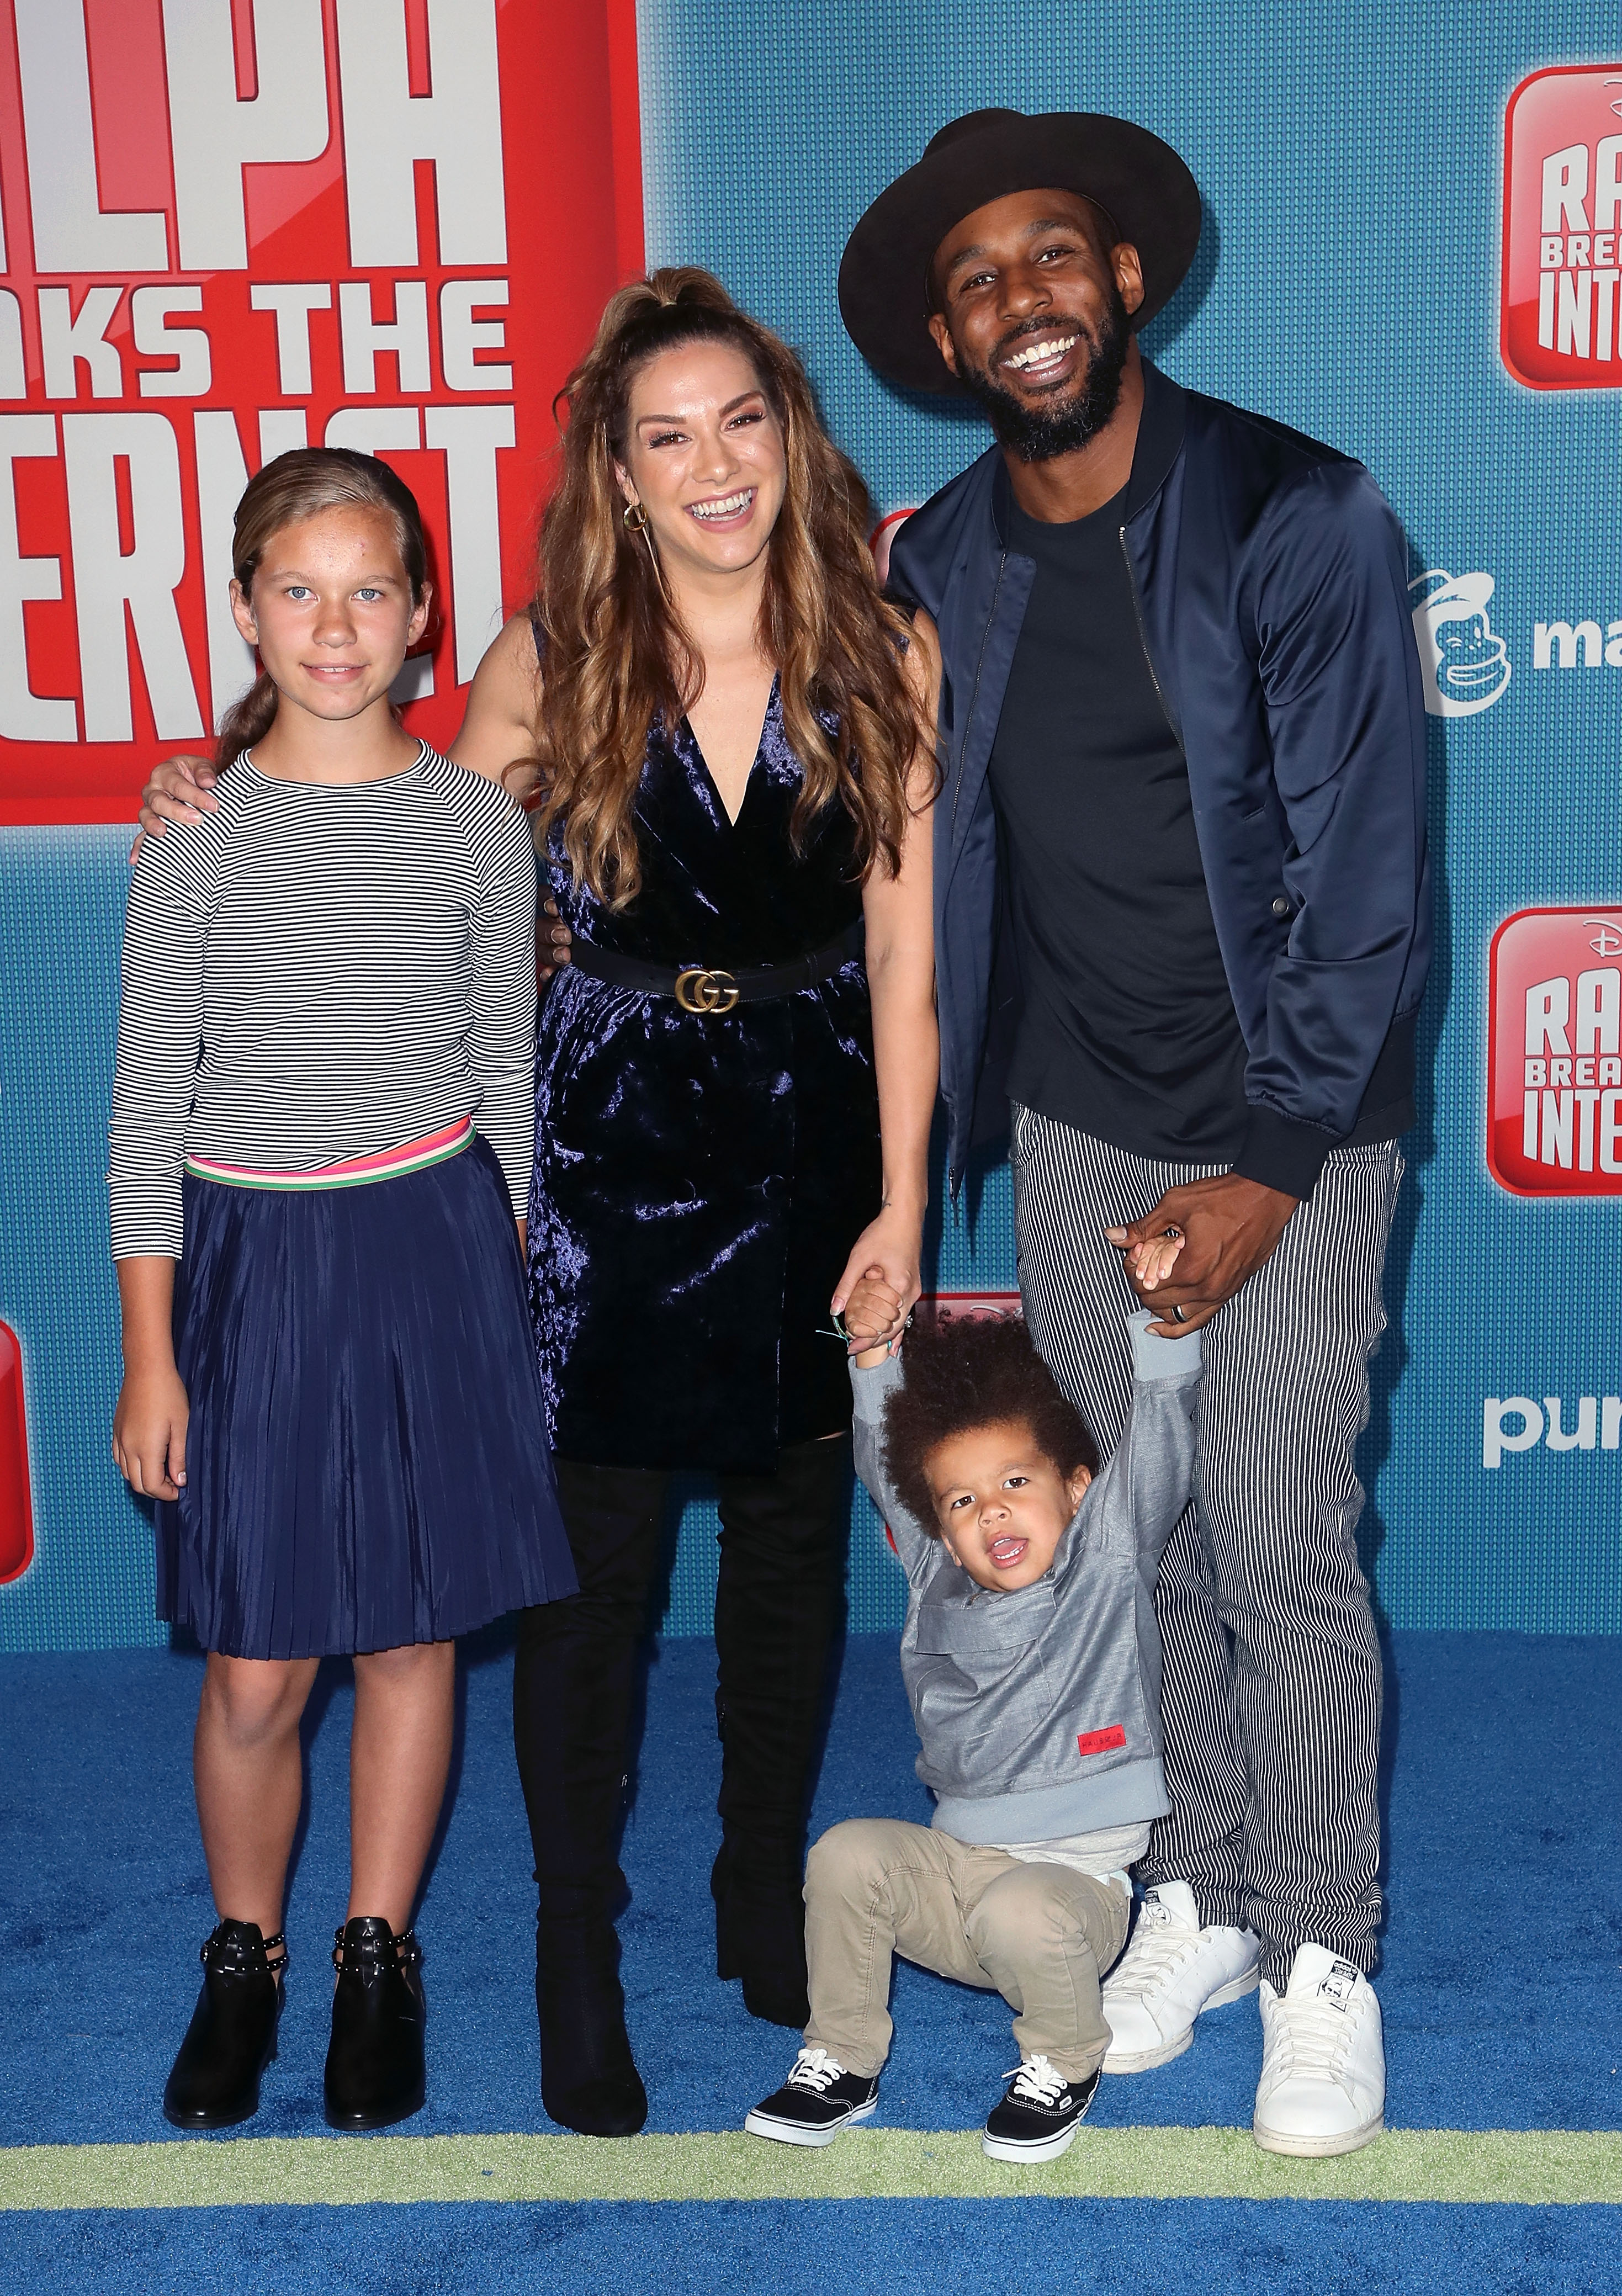 Allison Holker and Stephen 'tWitch' Boss at the Los Angeles premiere of Disney's 'Ralph Breaks the Internet' on November 5, 2018 | Source: Getty Image